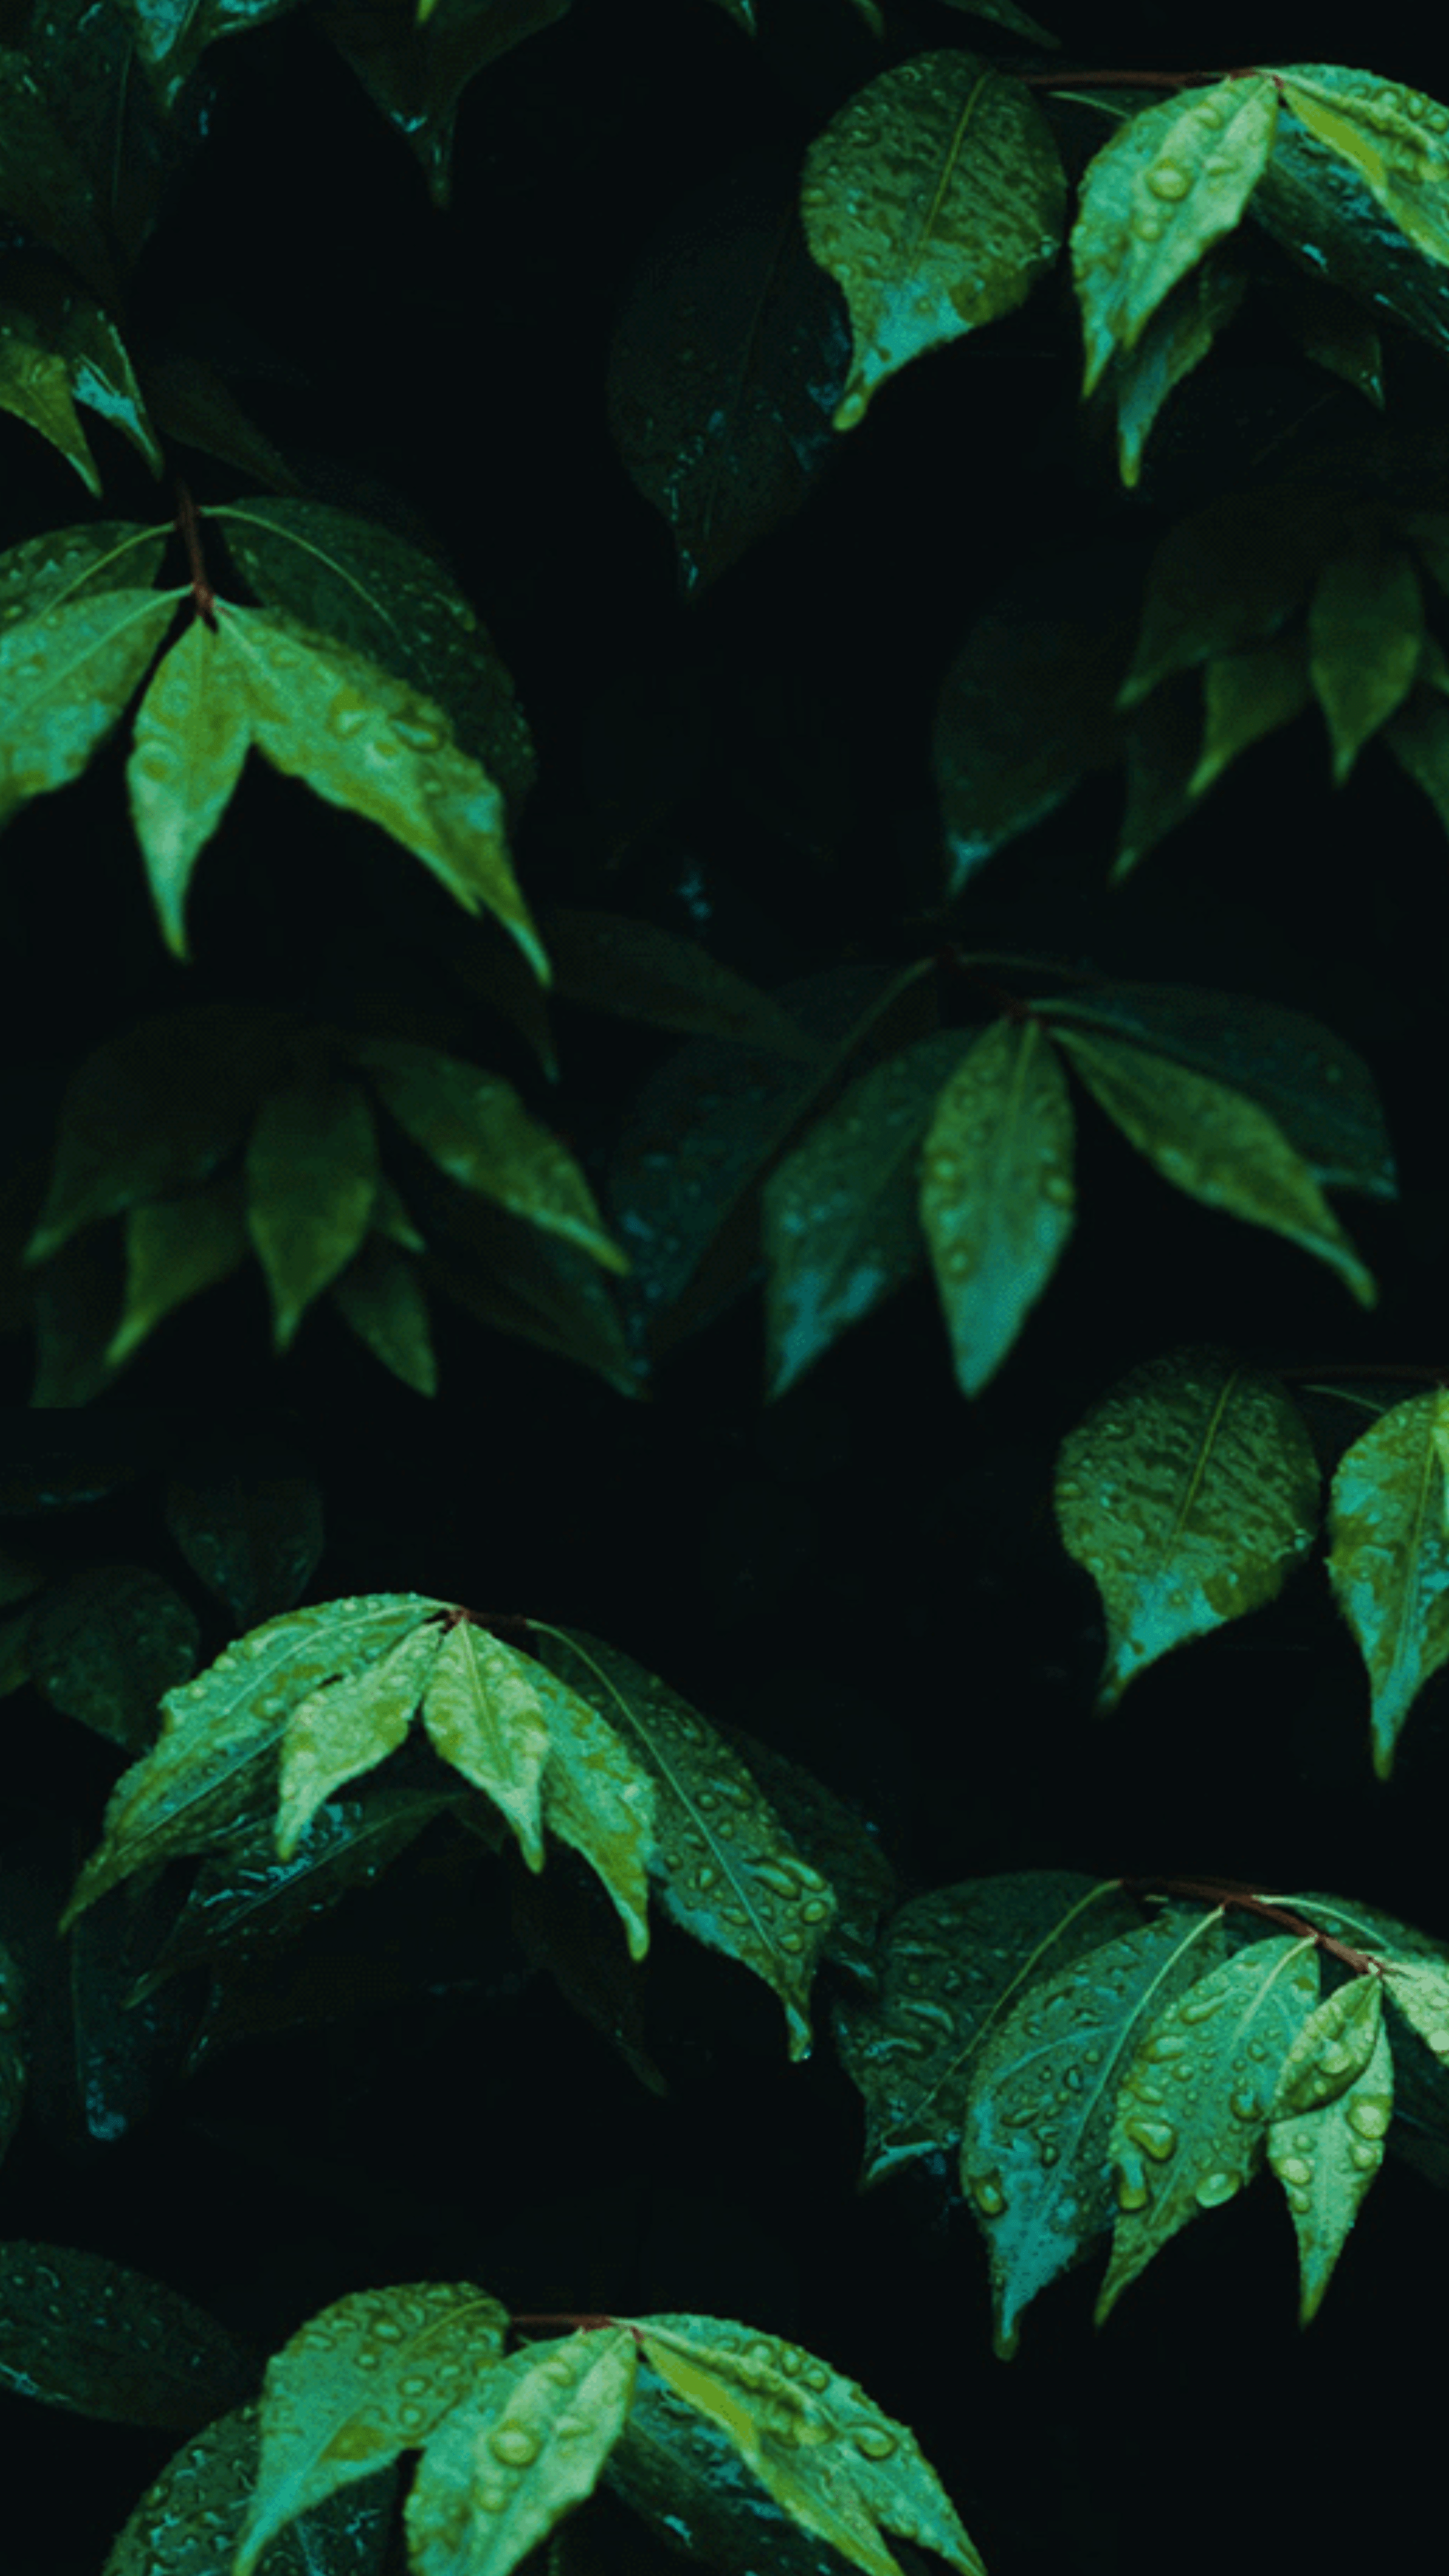 A close up of some green leaves - Leaves